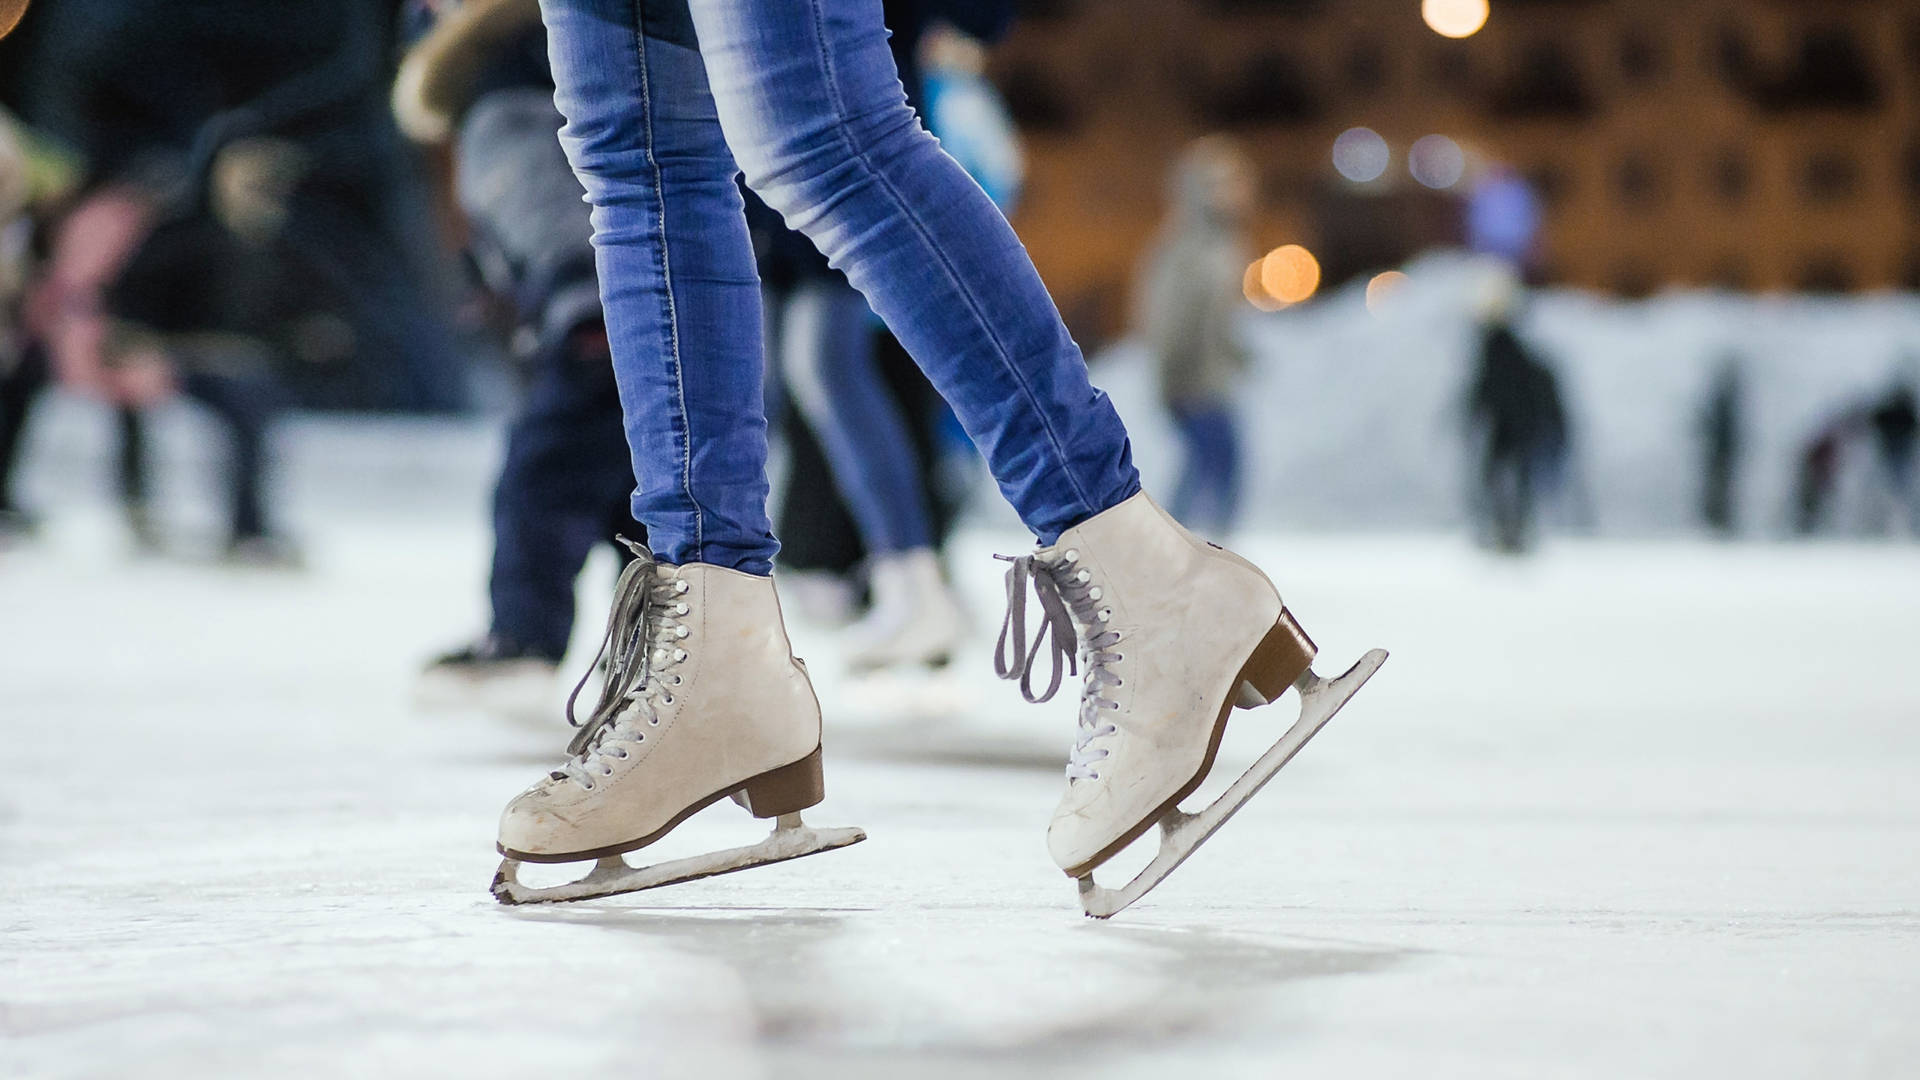 Ice Skating Shoes On Chilly Rink Wallpaper